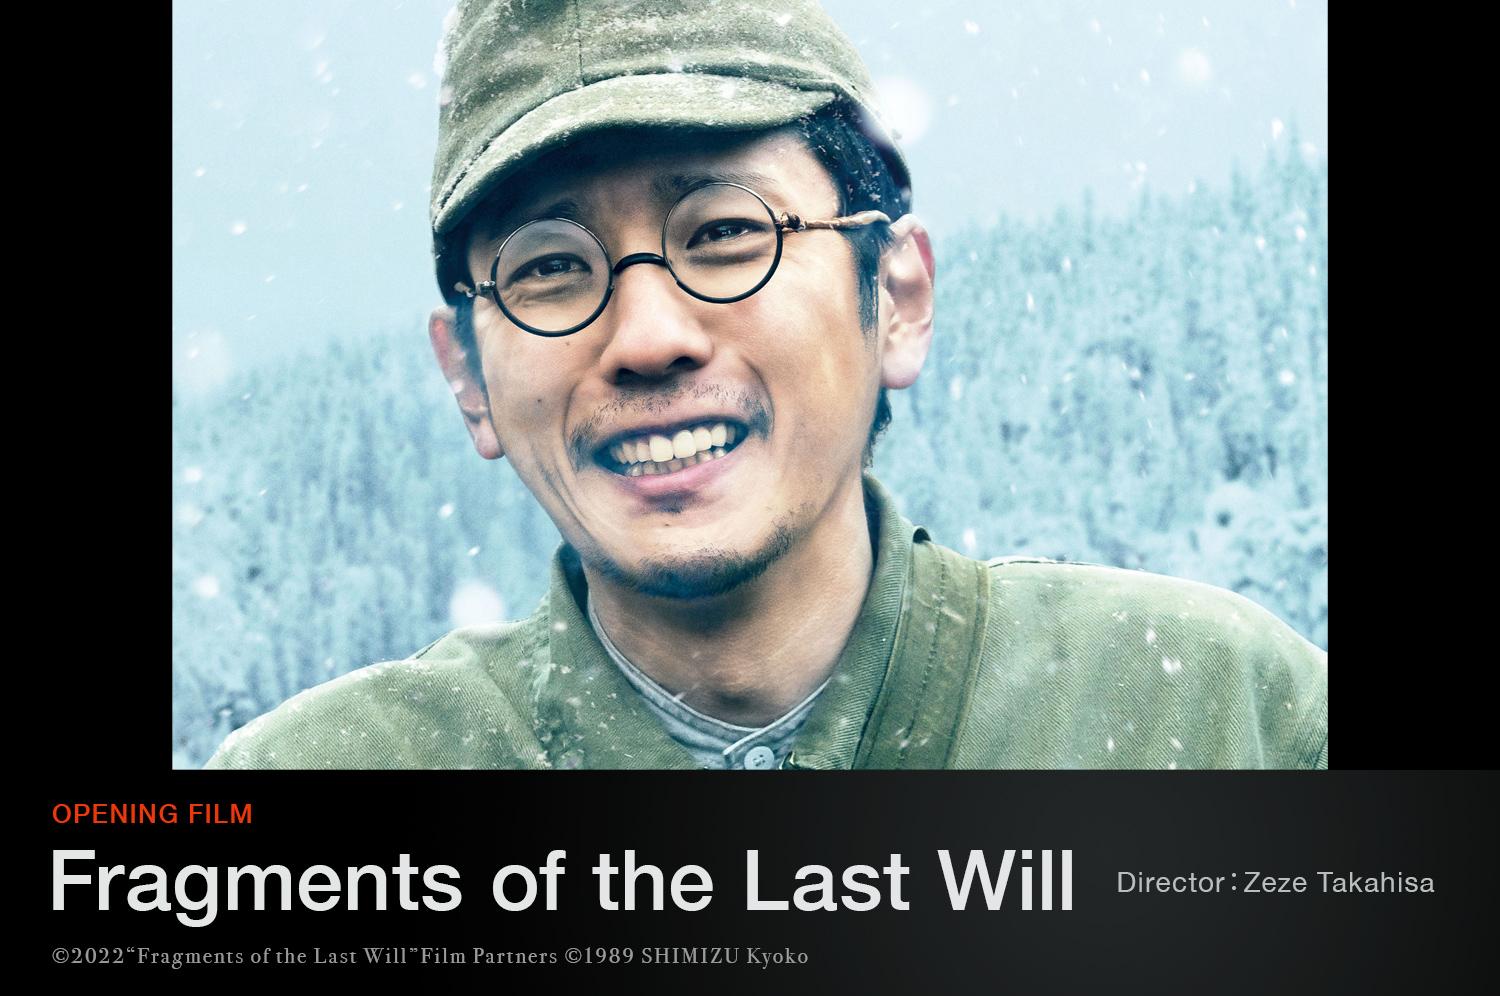 Opening Film Fragments of the Last Will